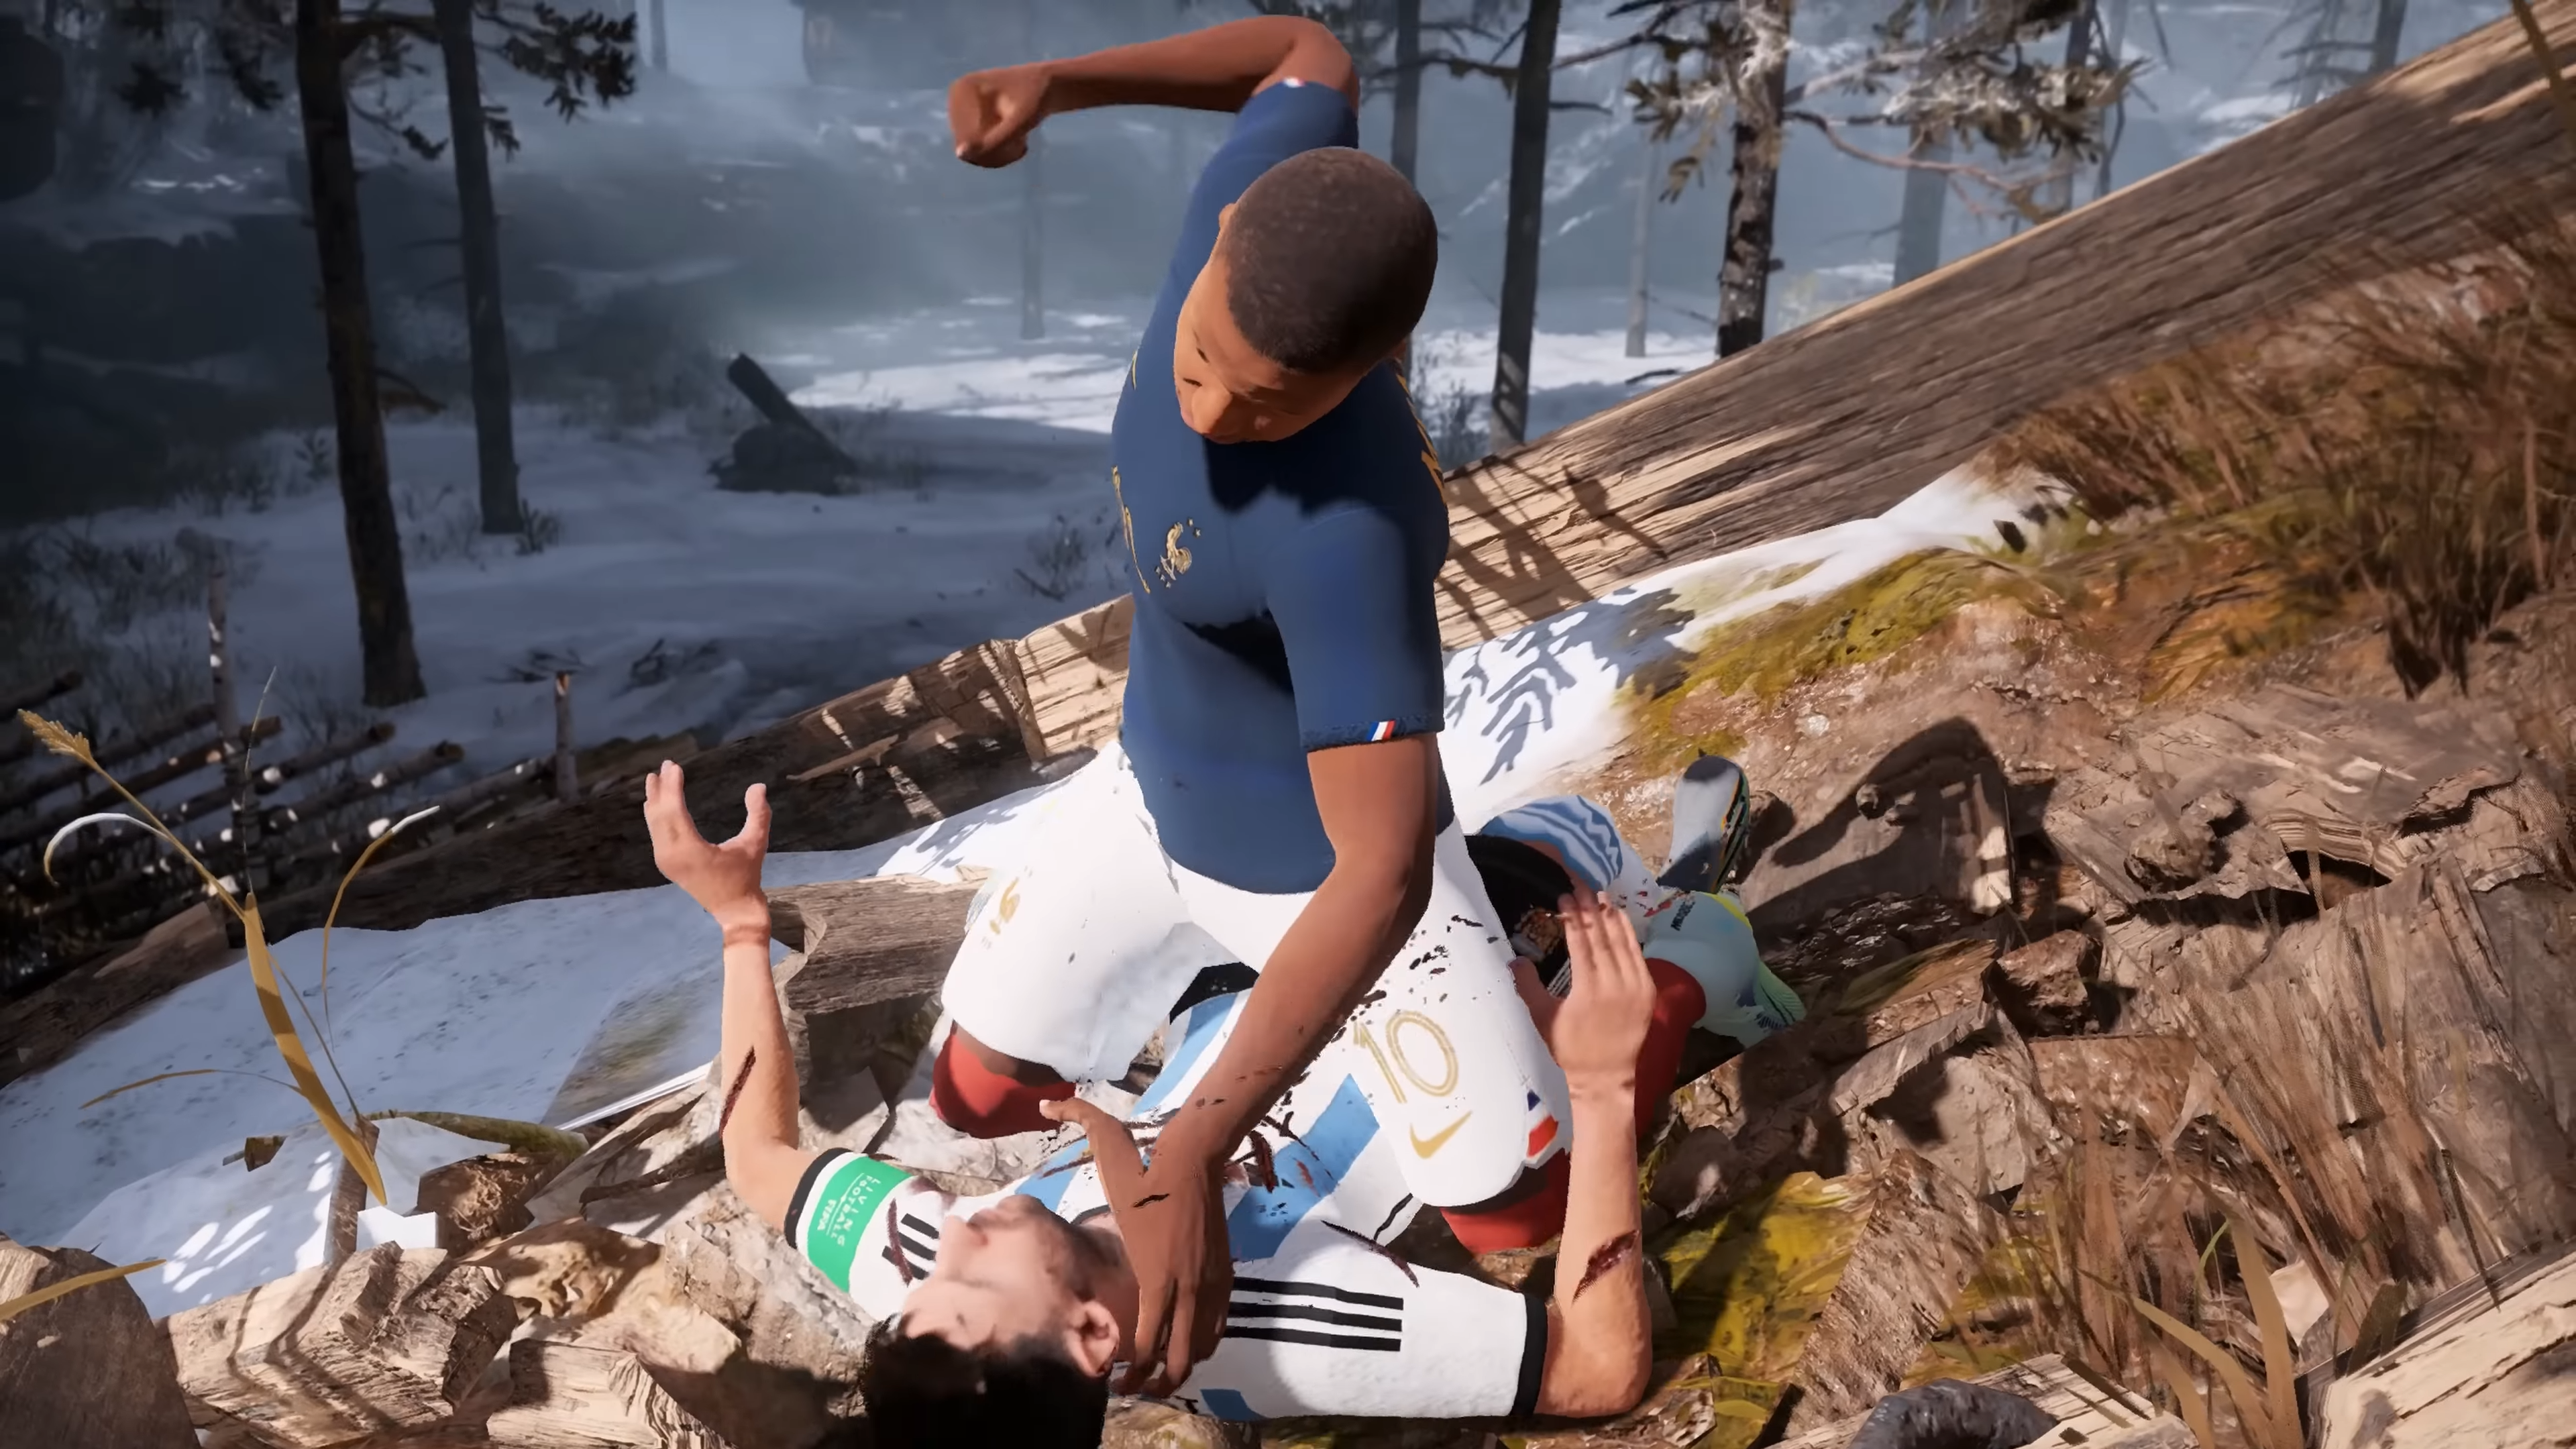 Someone modded that God of War scene to have Messi and Mbappe battle it out  